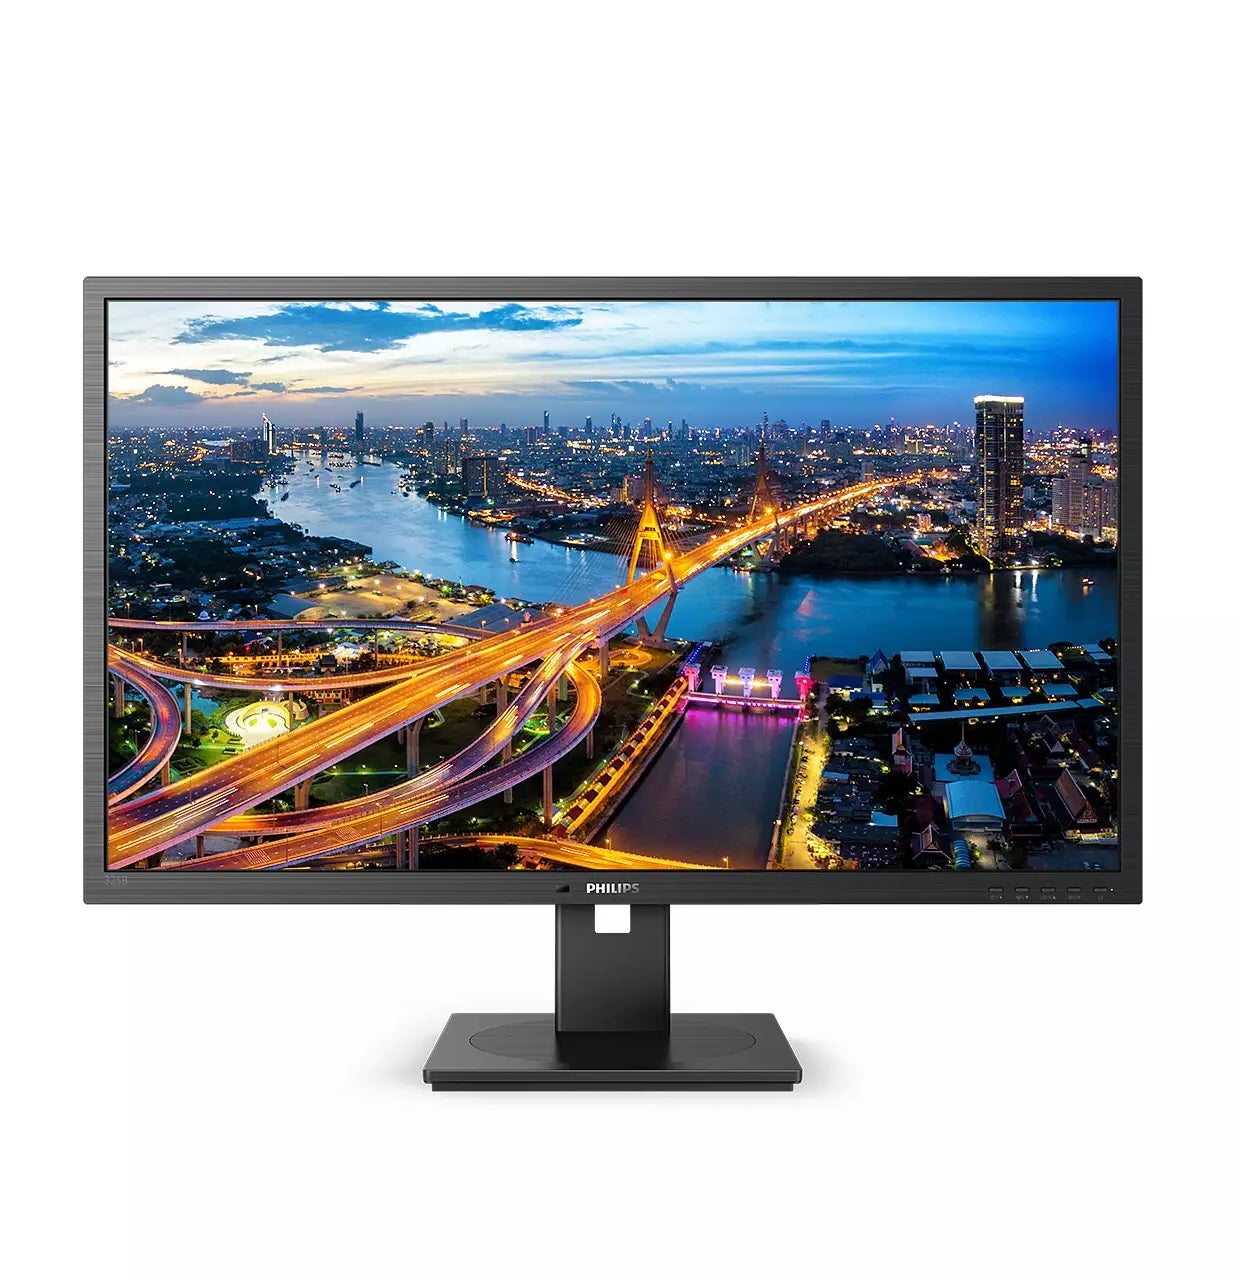 Philips 325B1L 31.5inch WLED LCD Monitor